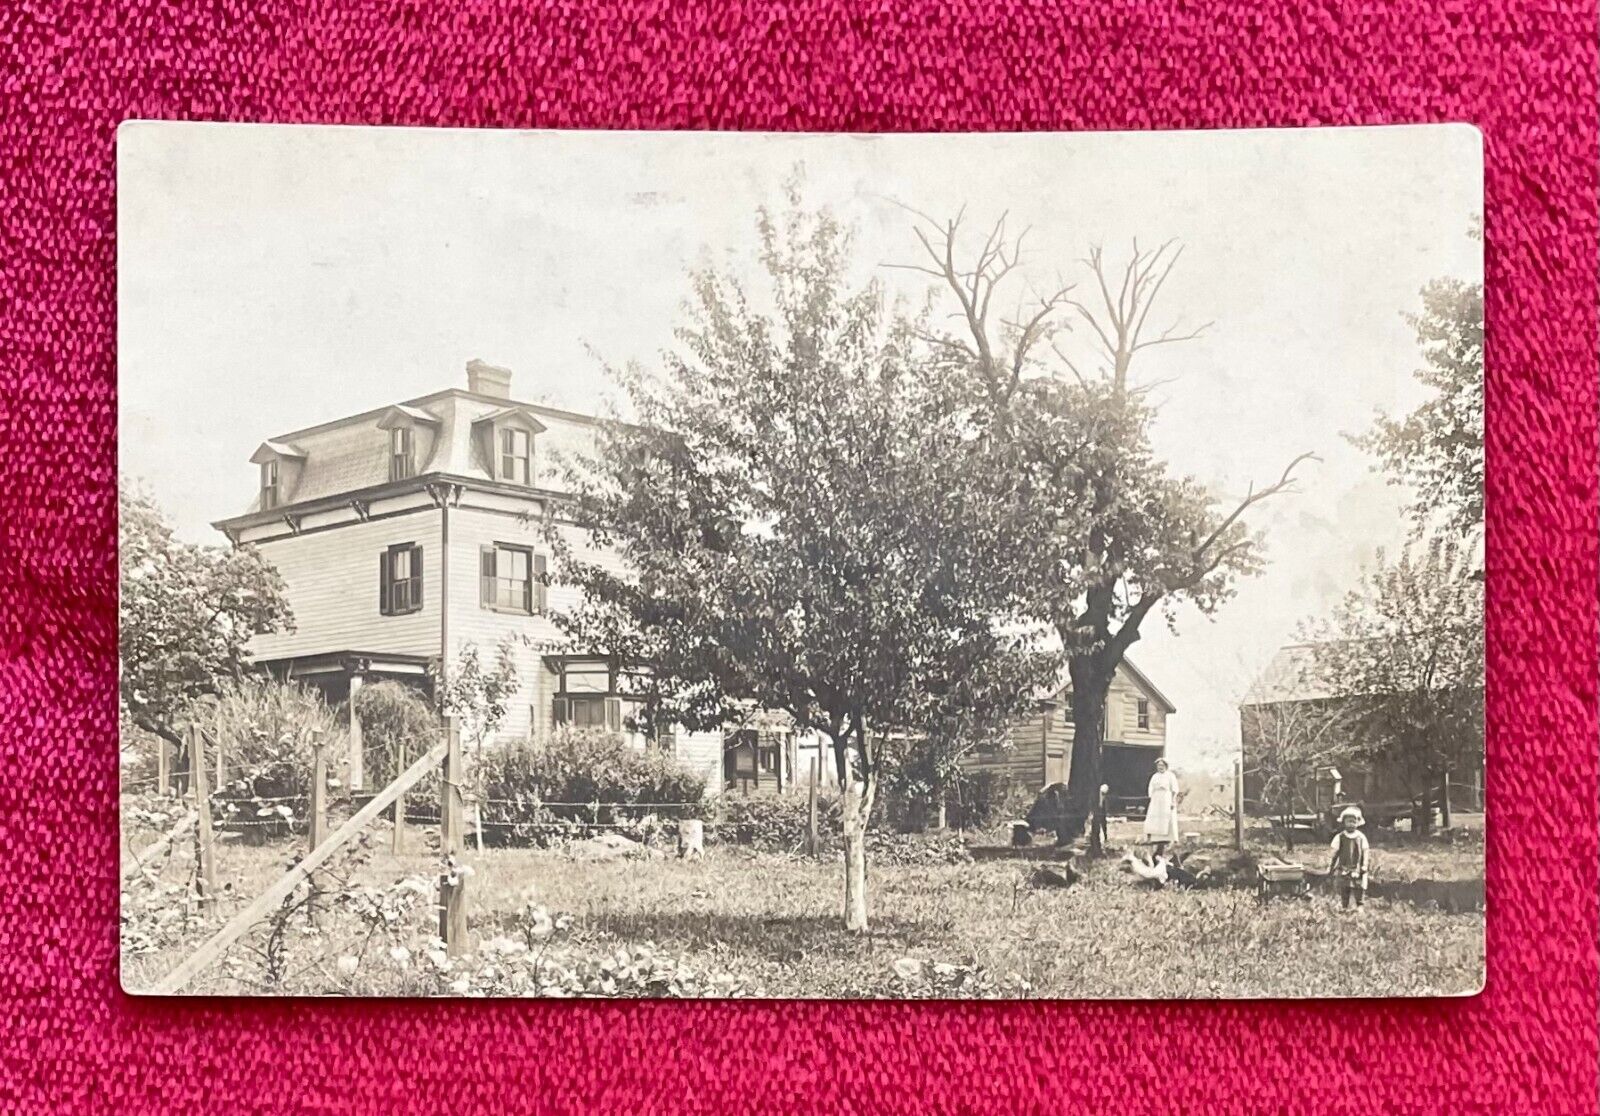 PLAINFIELD, NEW JERSEY FAMILY FARM by THE STAR POST CARD CO. 1910